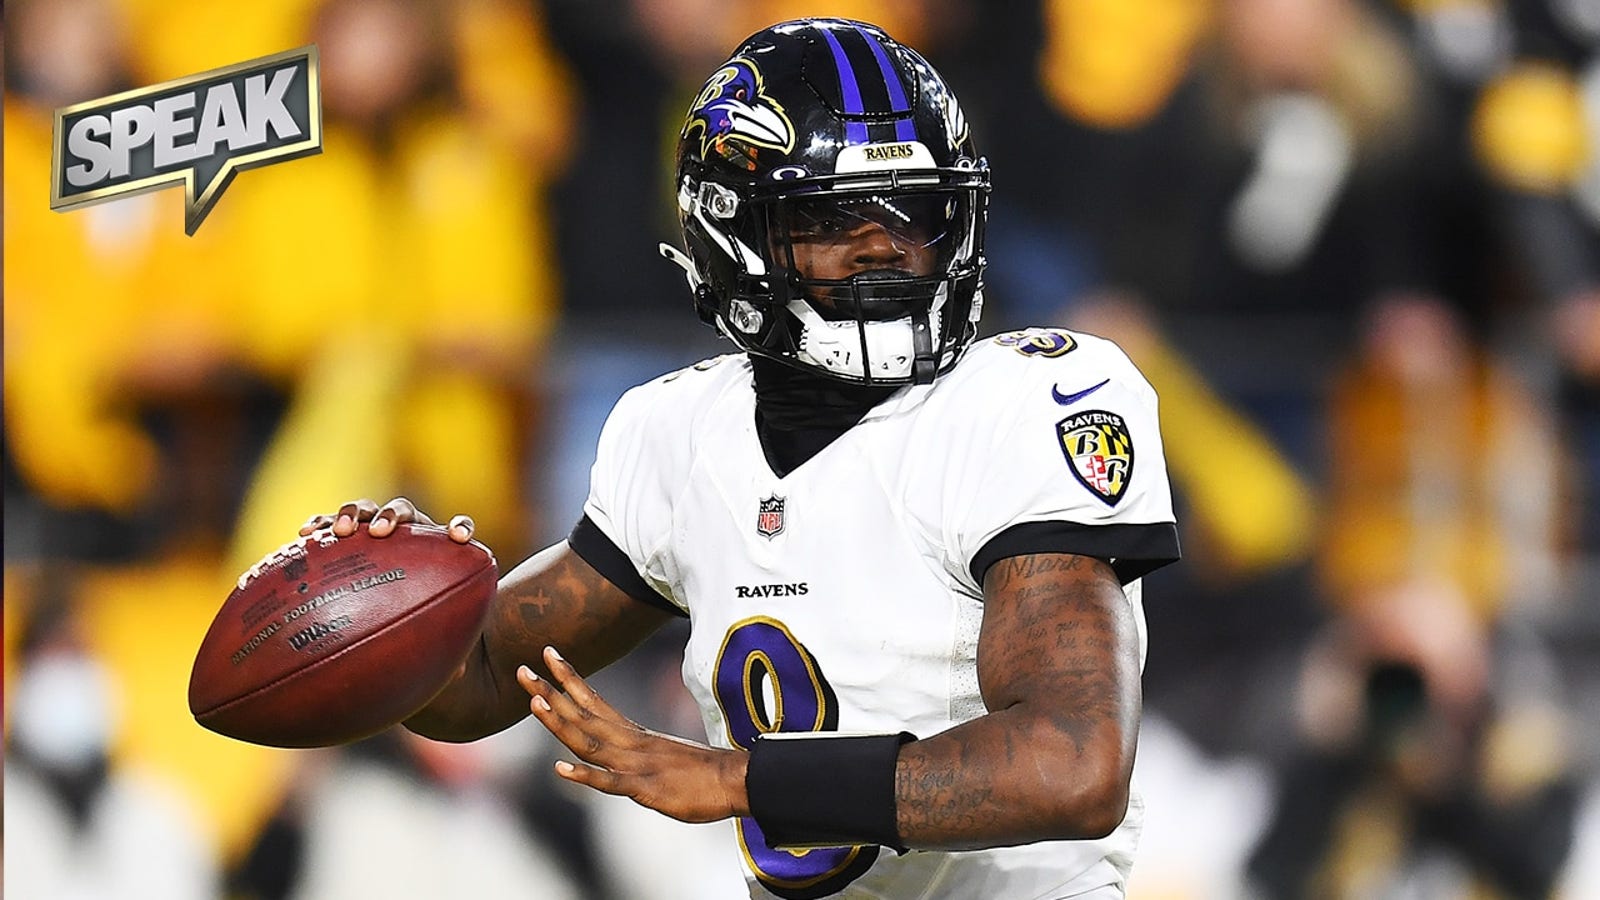 Ravens GM would pick a QB in first round 'depending on board' amidst Lamar Jackson saga